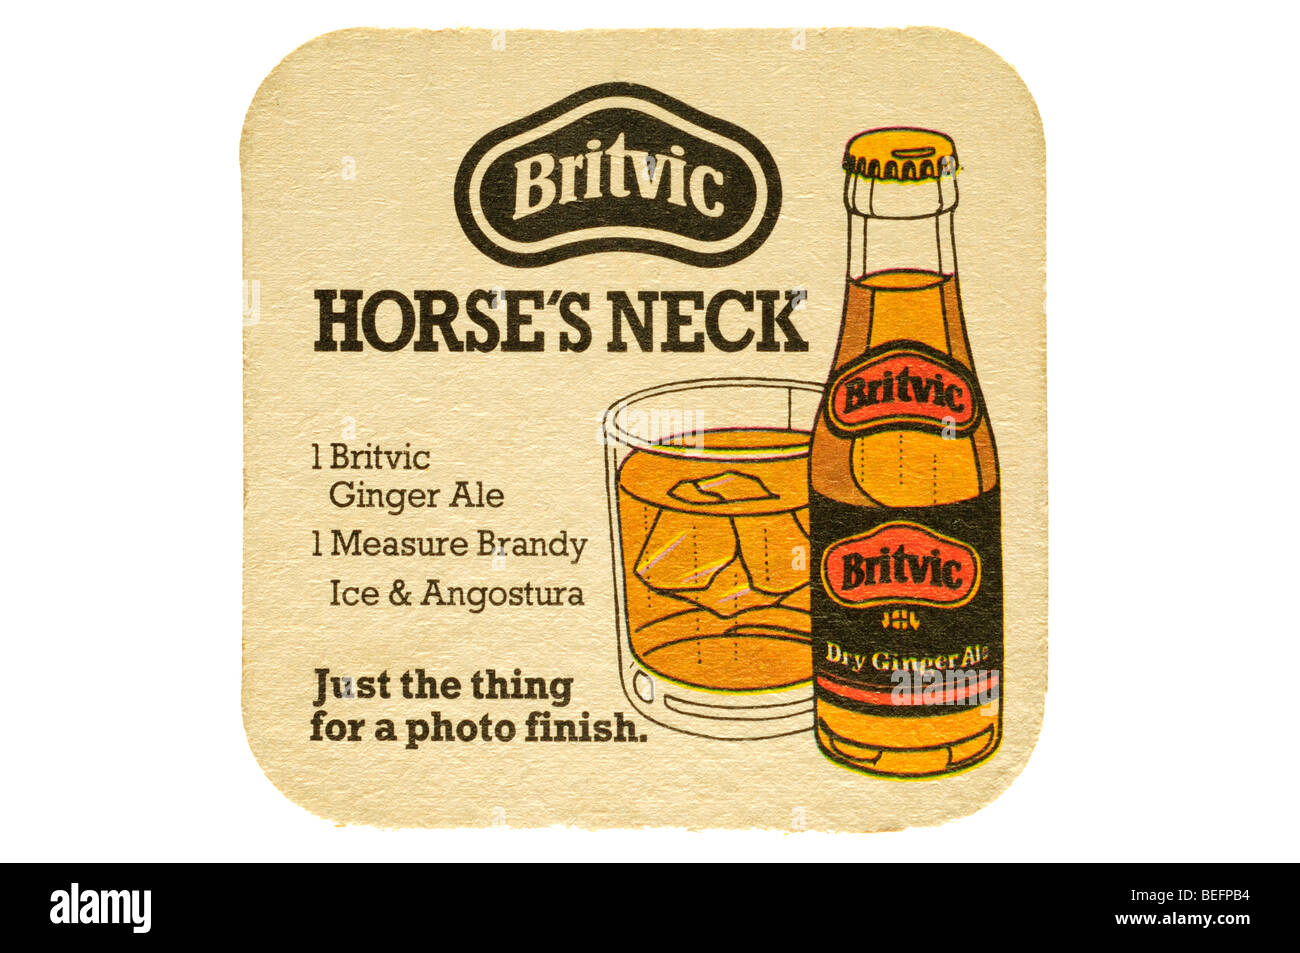 britvic horses neck 1 britvick ginger ale 1 measure brandy ice & angostura  just the thing for a photo finish Stock Photo - Alamy